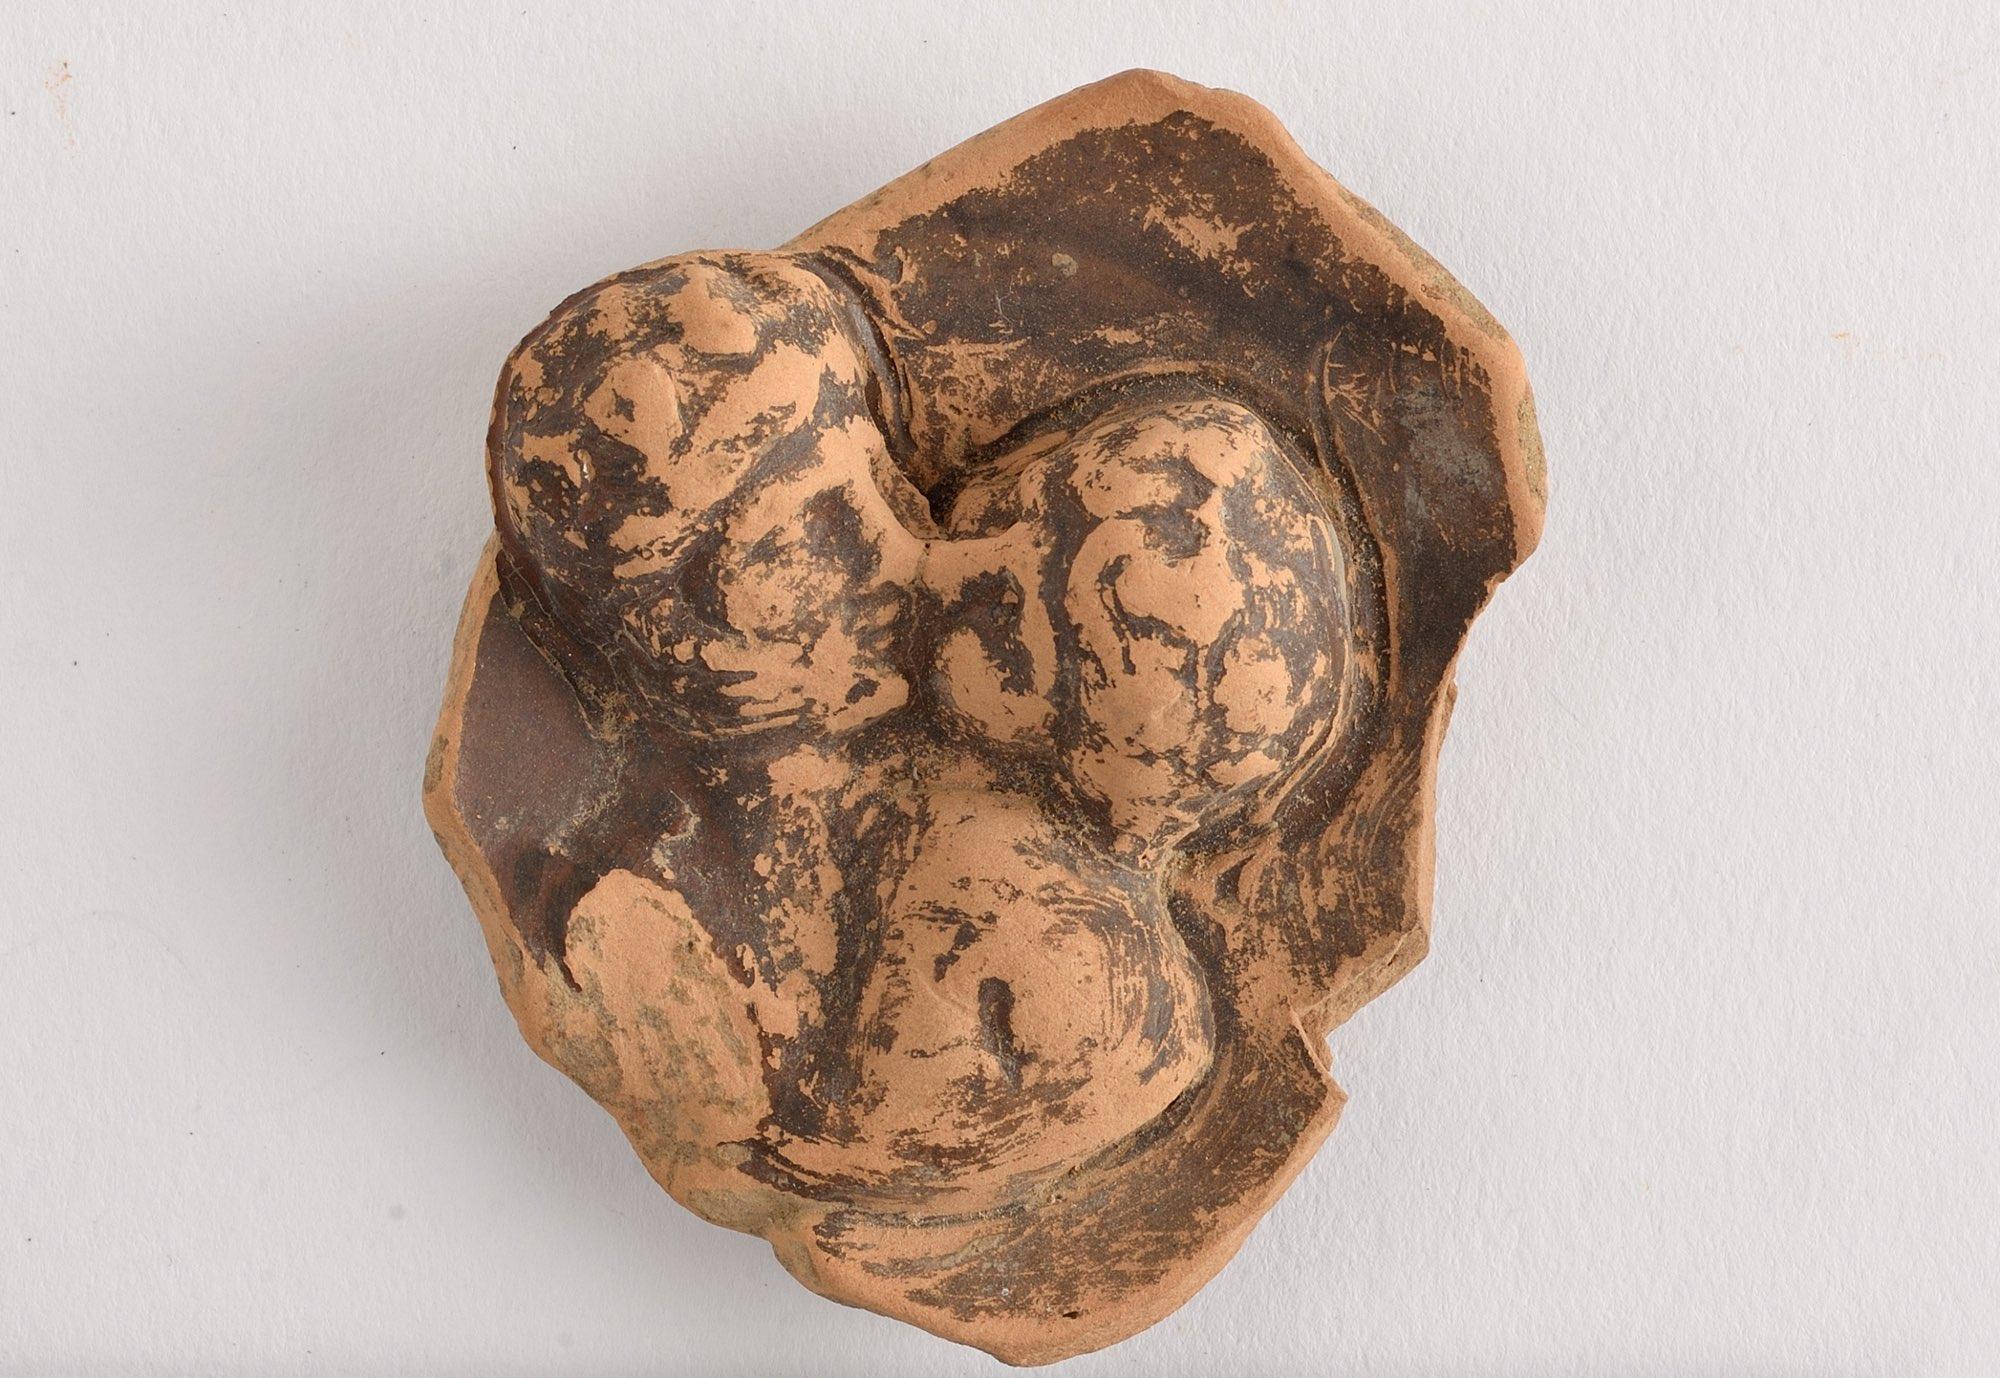 Bottom of a clay cup, with relief of a kissing couple from Elis (Αrchaeological Museum of Elis). – © Hellenic Ministry of Culture and Sports / Ephorate of Antiquities of Ilia